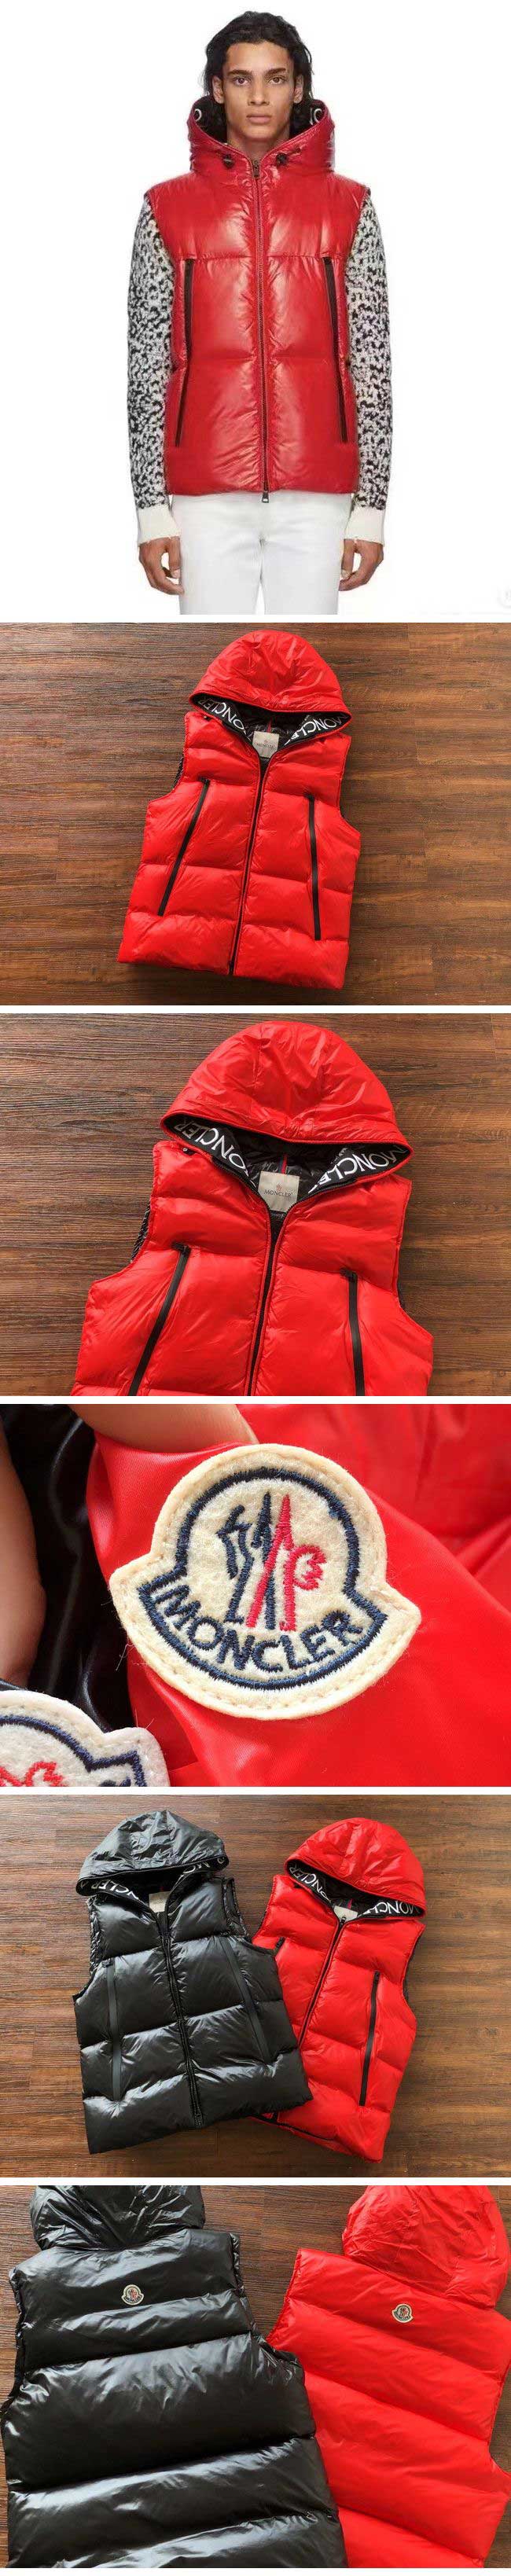 Moncler Agneaux Gilet モンクレール アニュー ジレ レッド